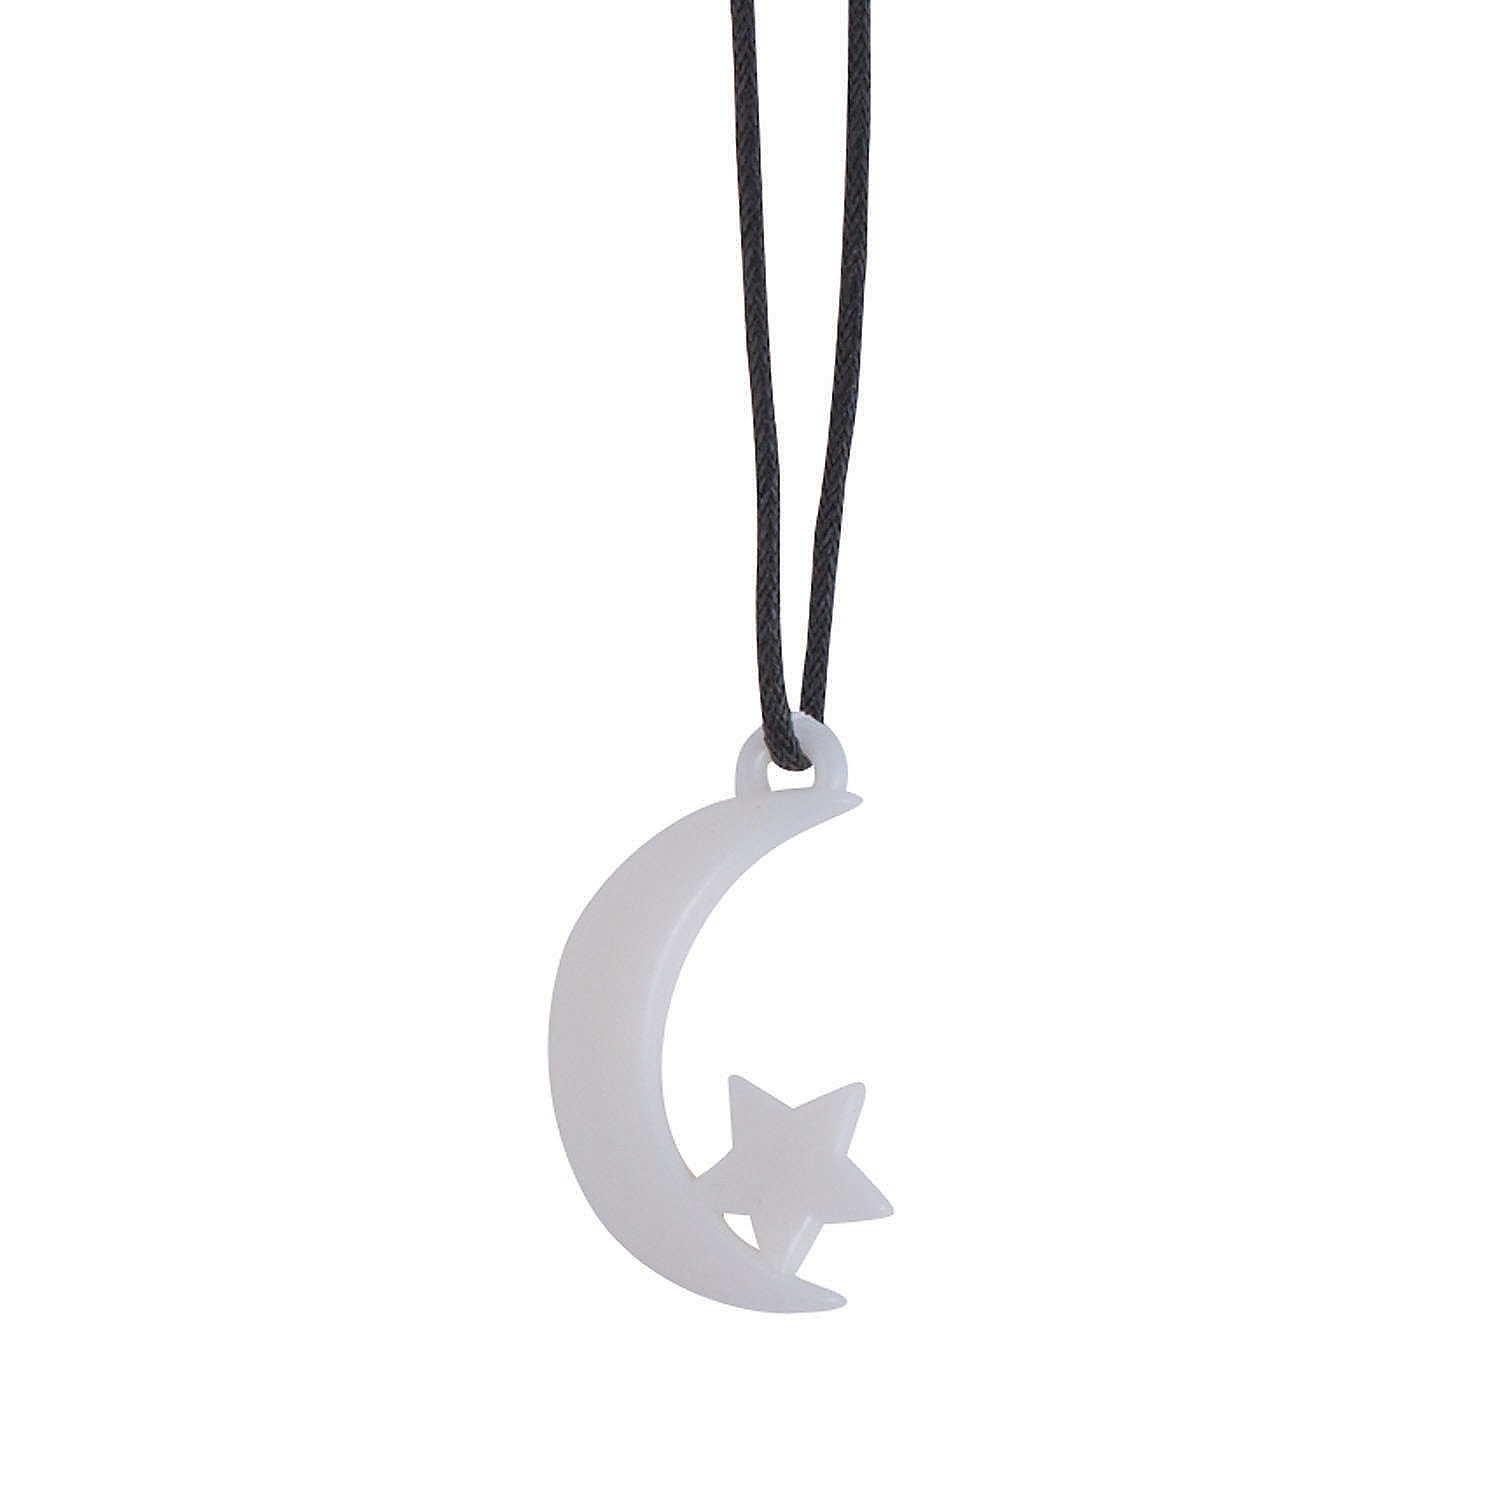 glow-in-the-dark-moon-and-star-necklaces-48-pc-_13775294-a01